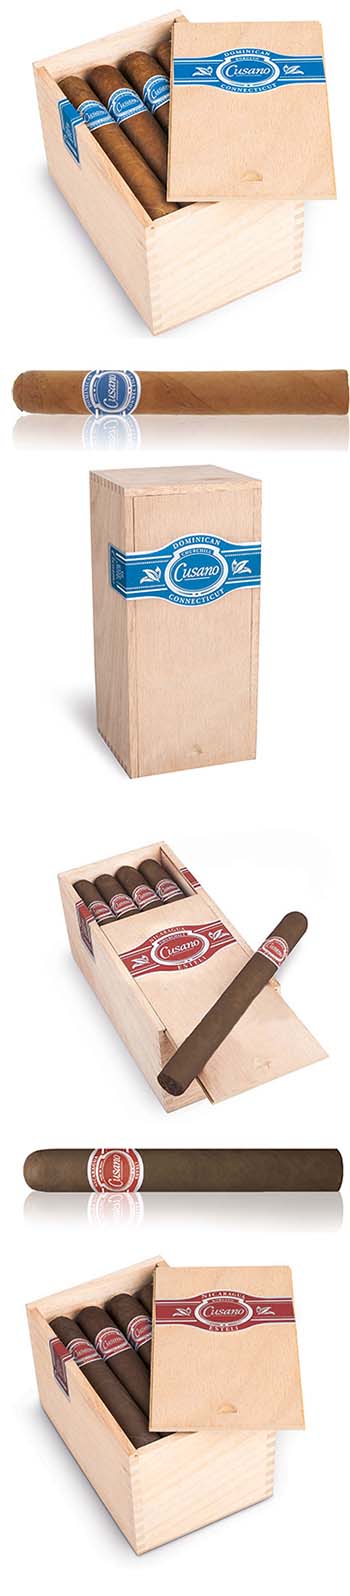 CUSANO by Davidoff with new blends 'Dominican Connecticut' and 'Nicaragua Estelí'.